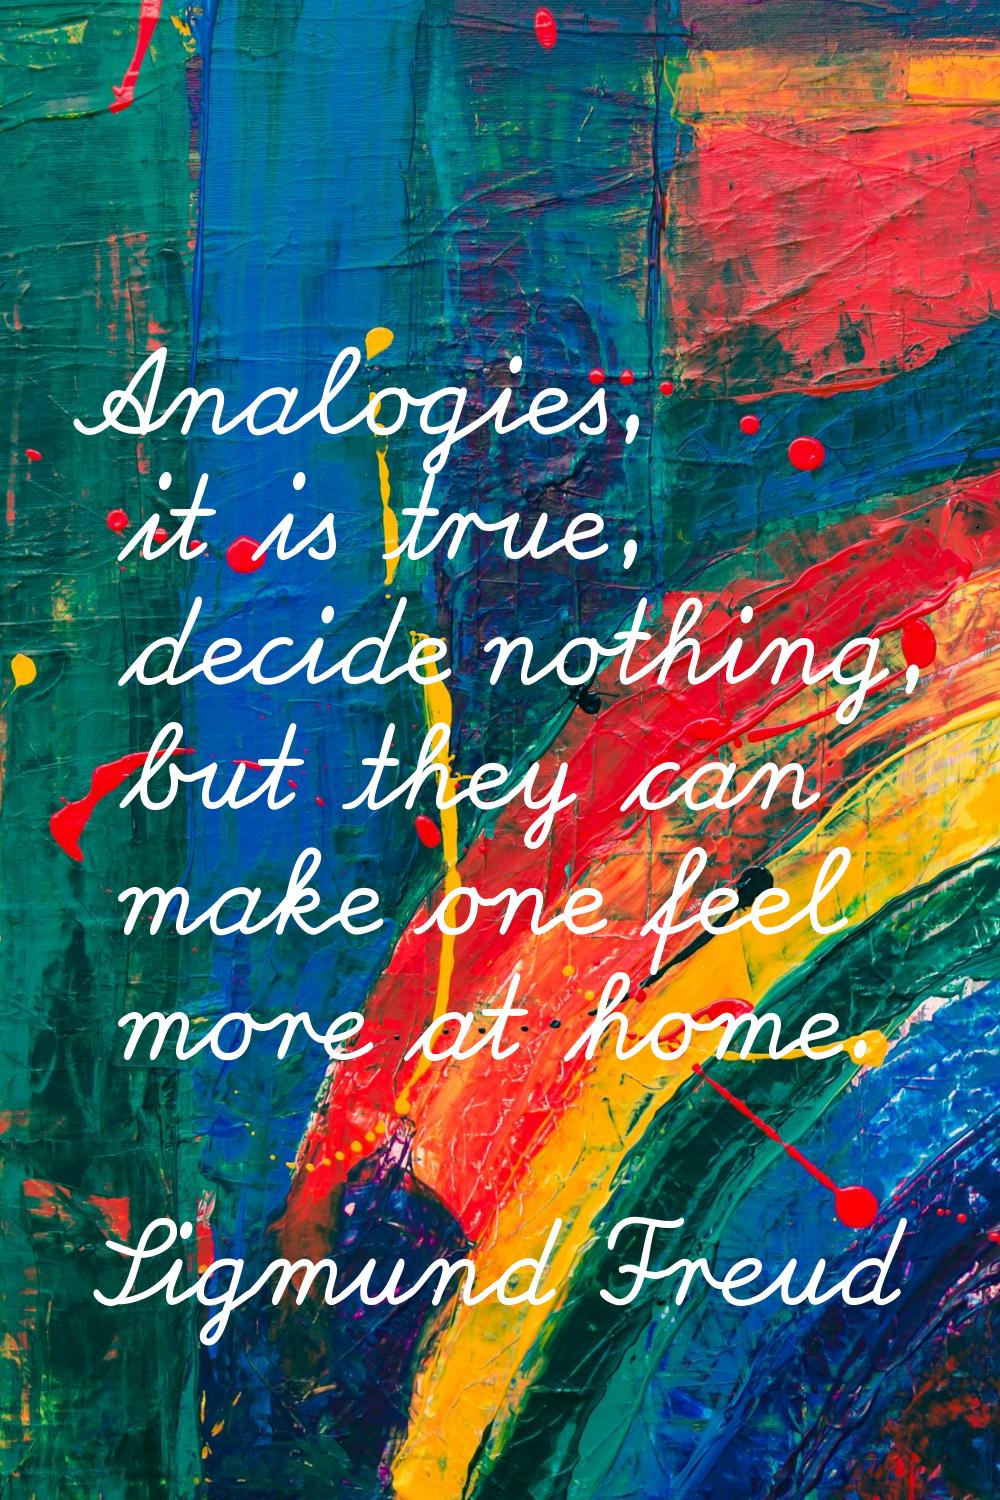 Analogies, it is true, decide nothing, but they can make one feel more at home.